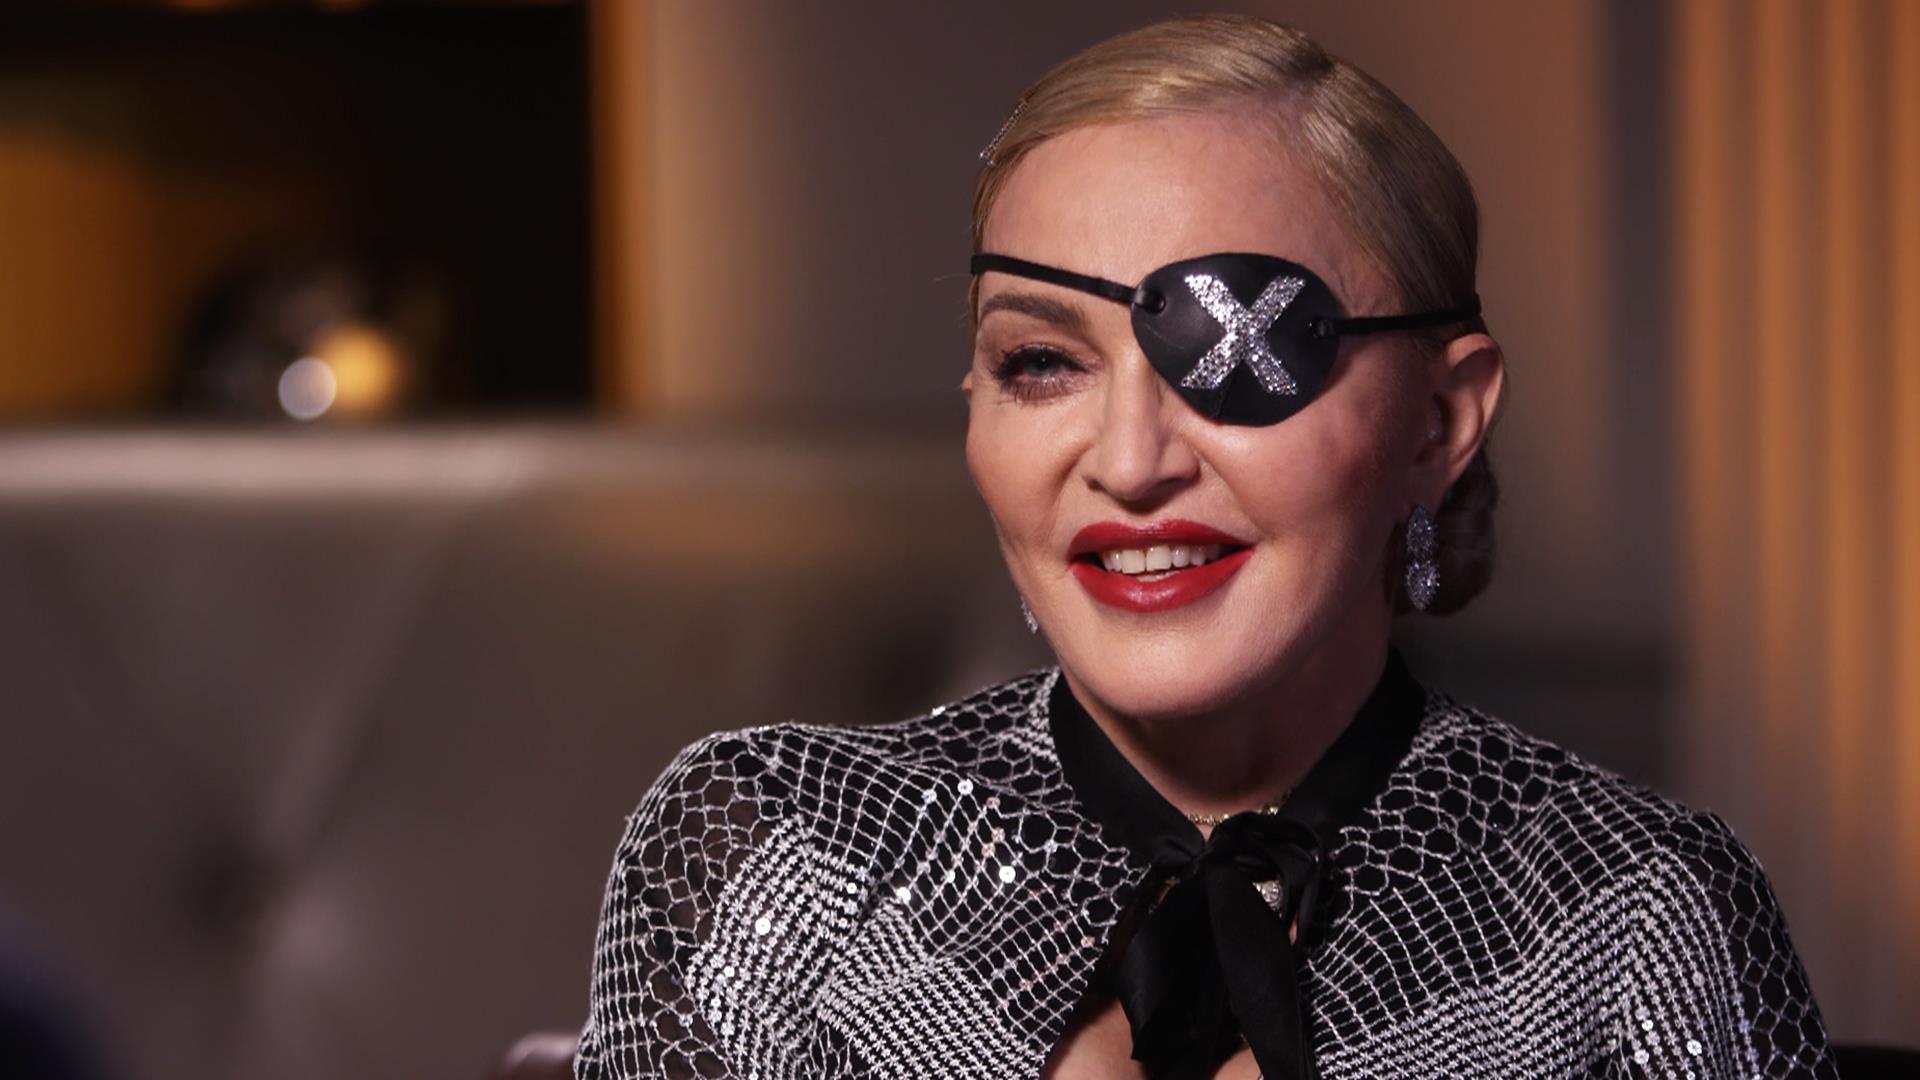 Madonna explains eye patch, meaning behind 'Madame X' persona